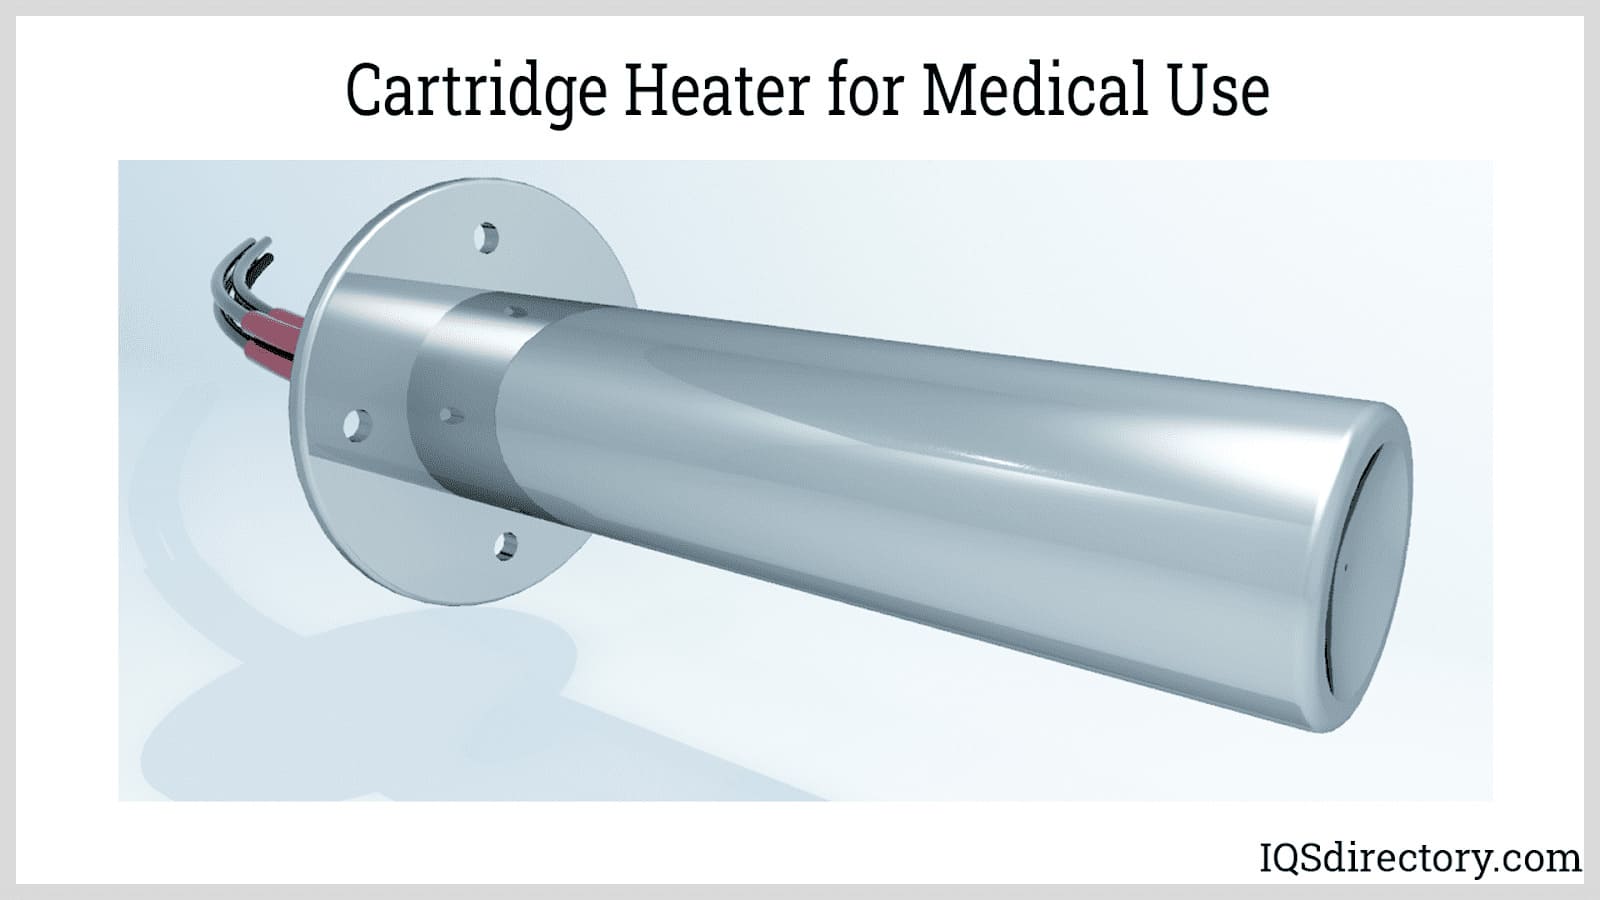 Cartridge Heater for Medical Use